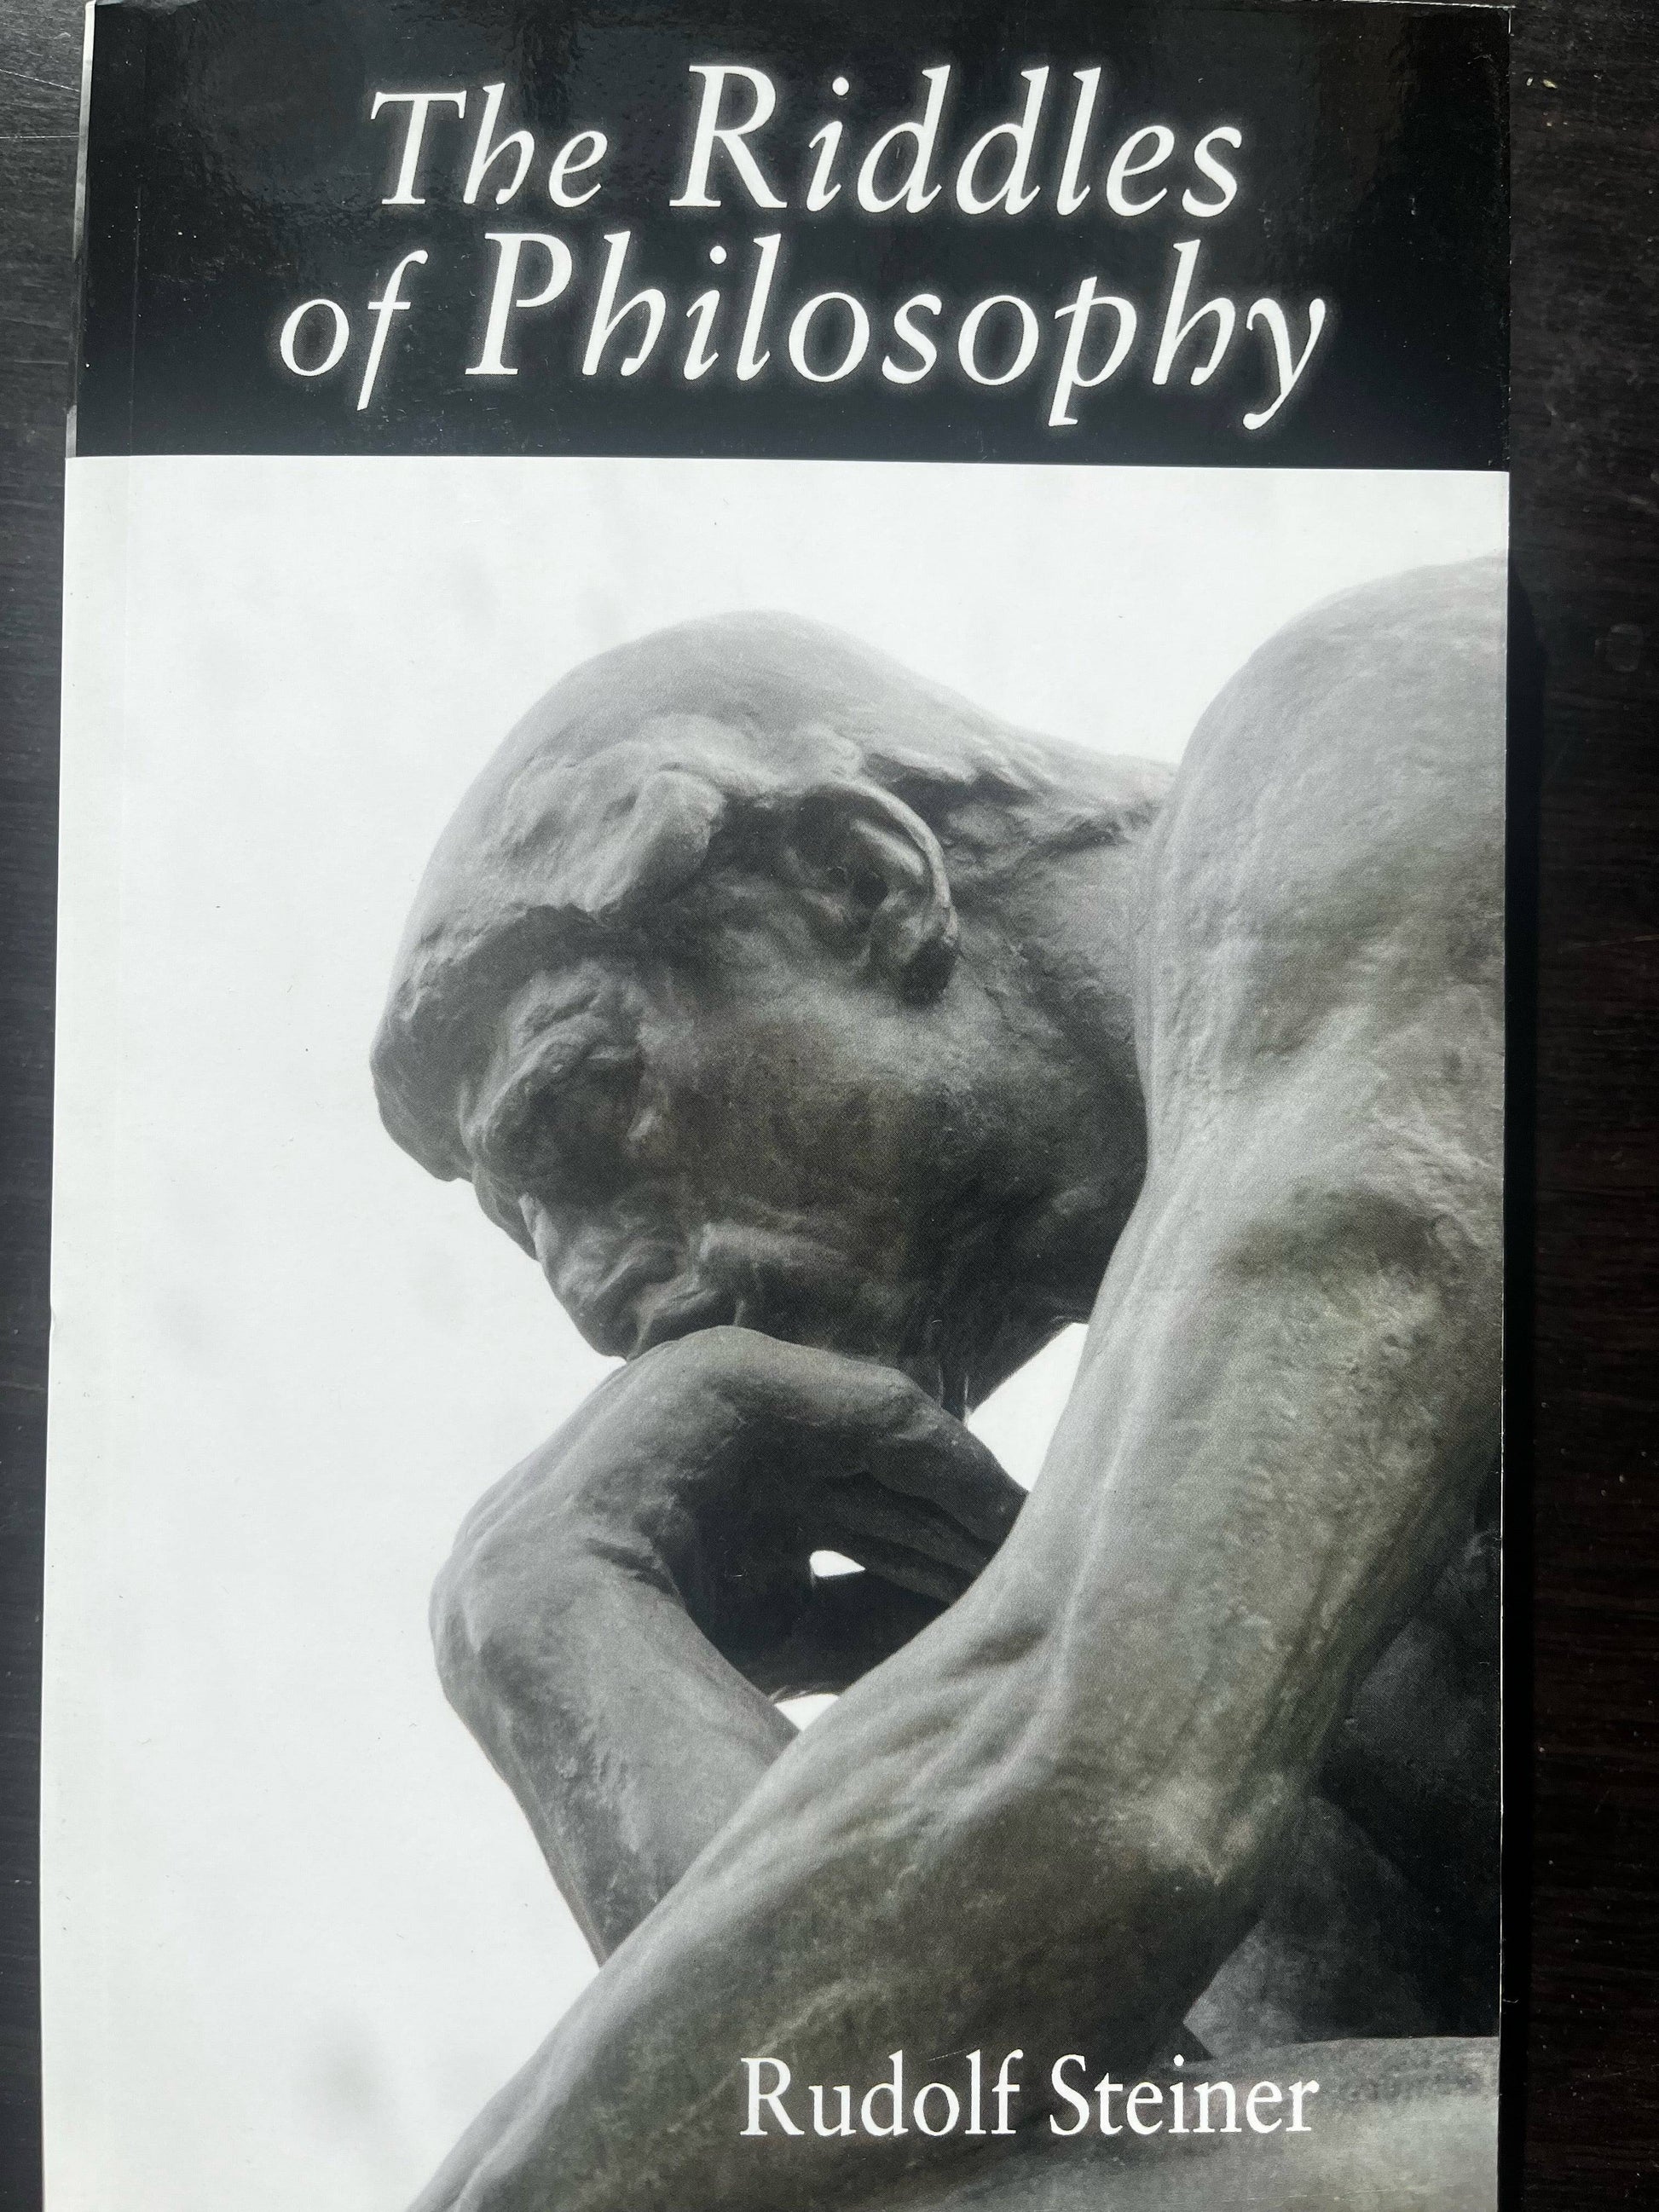 The Riddles of Philosophy by Rudolf Steiner - The Josephine Porter Institute